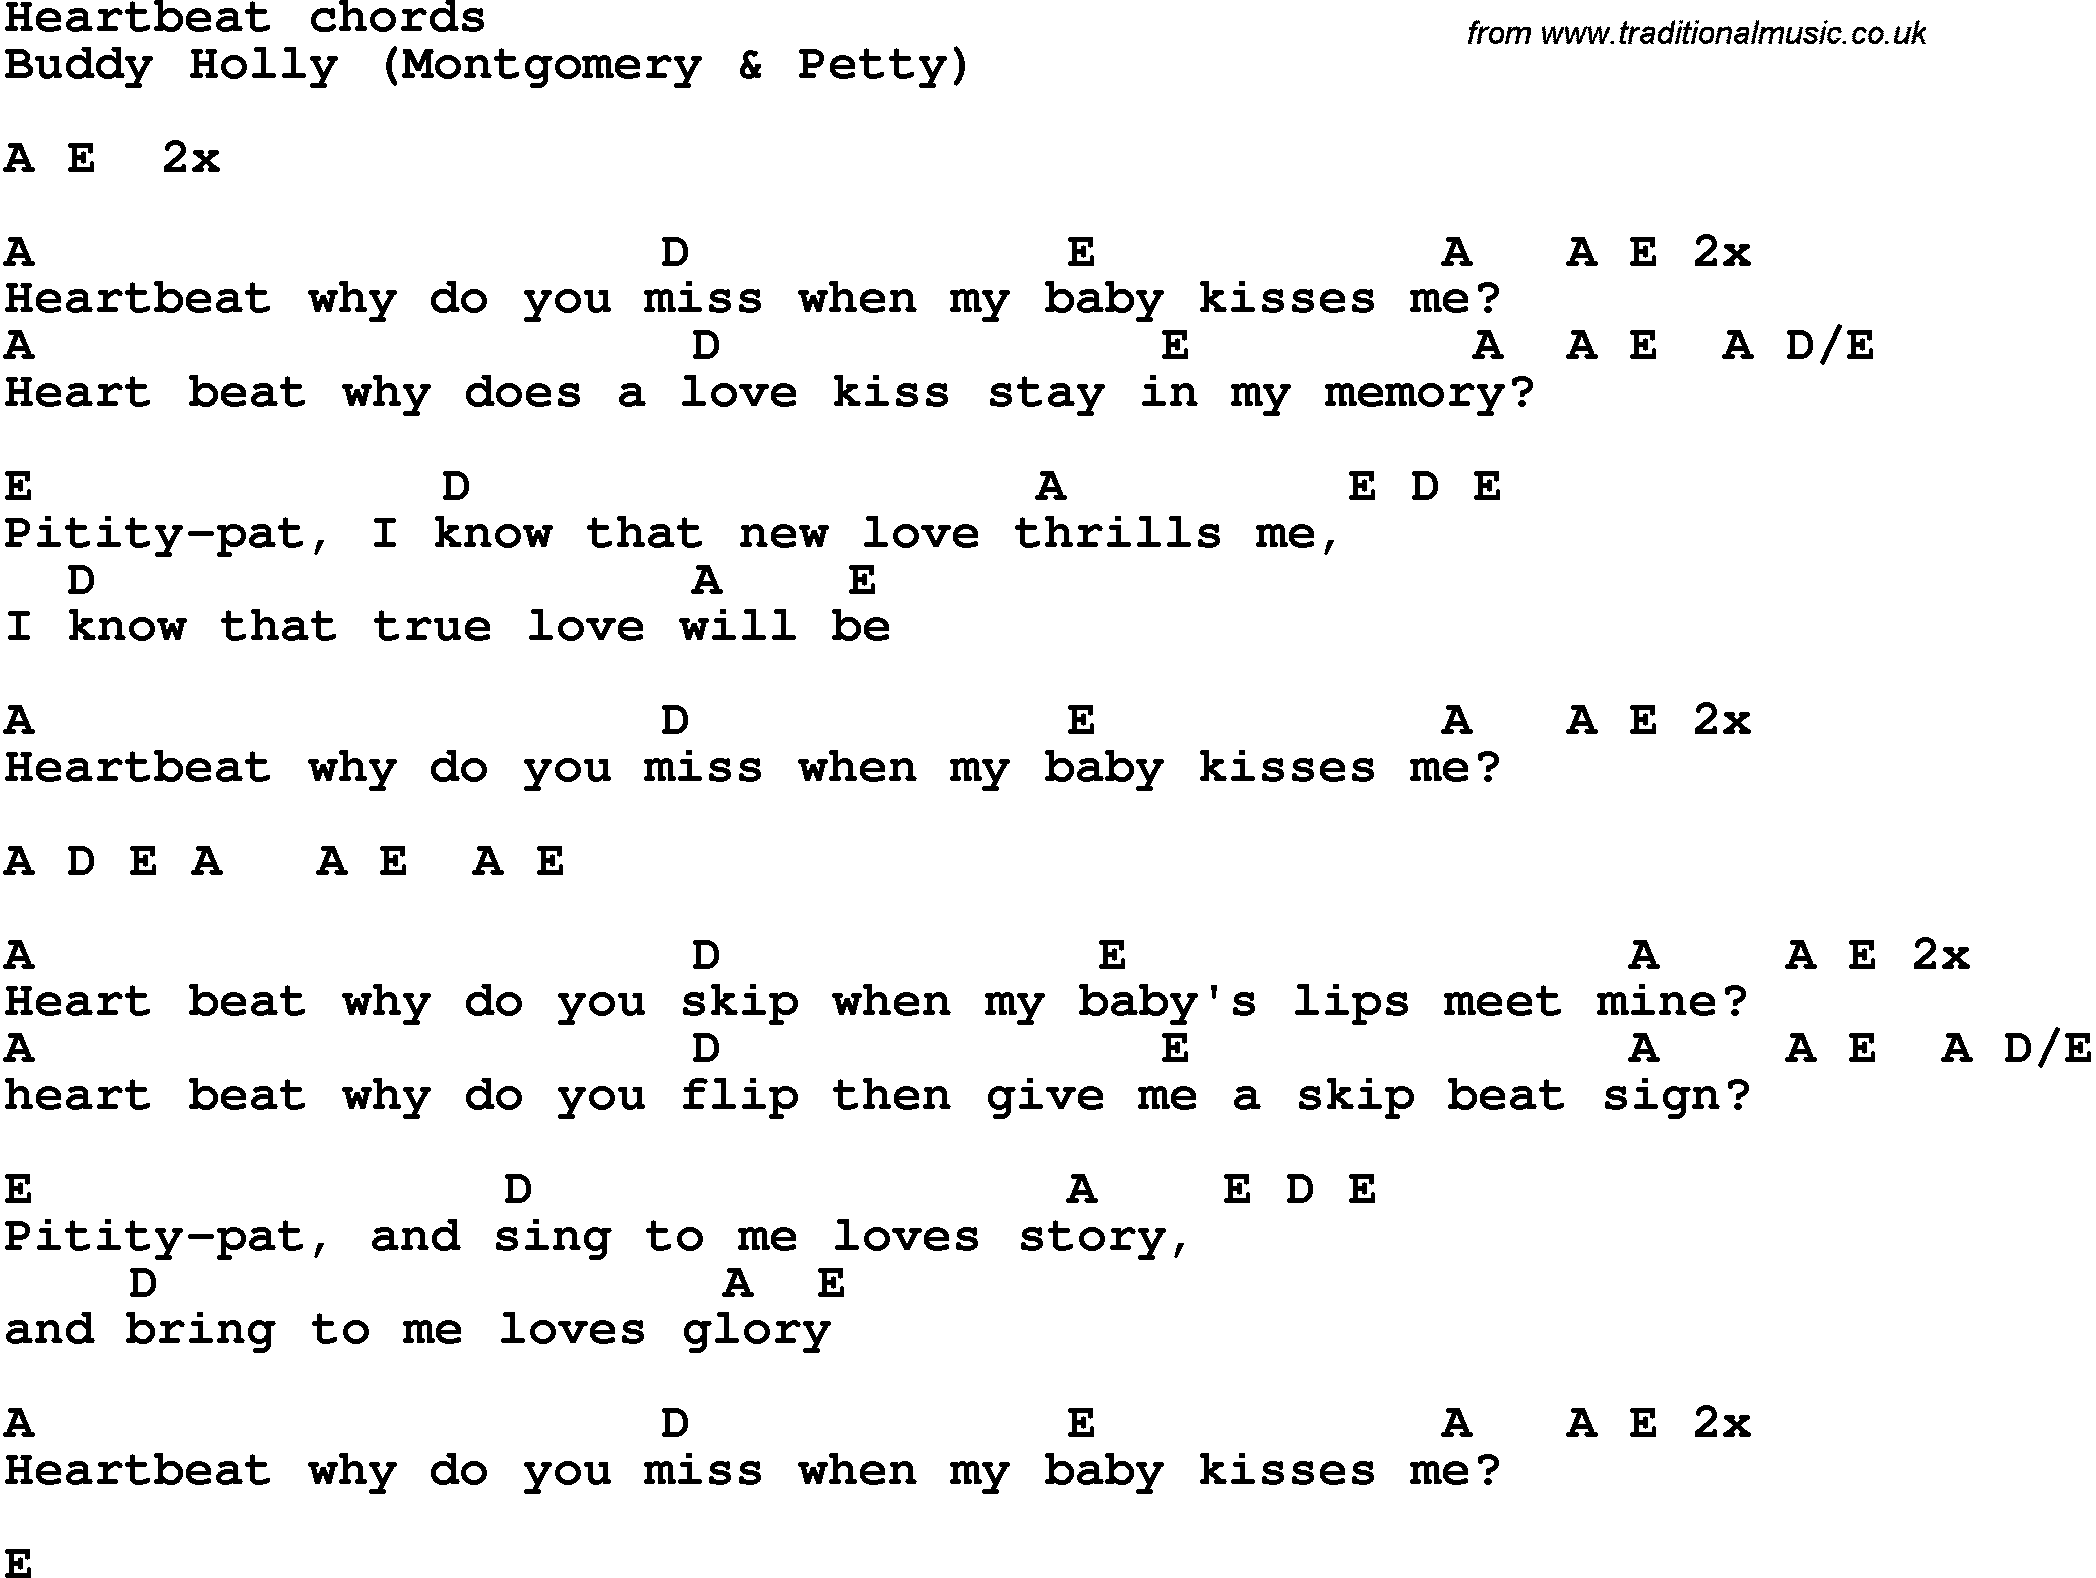 Song Lyrics with guitar chords for Heartbeat